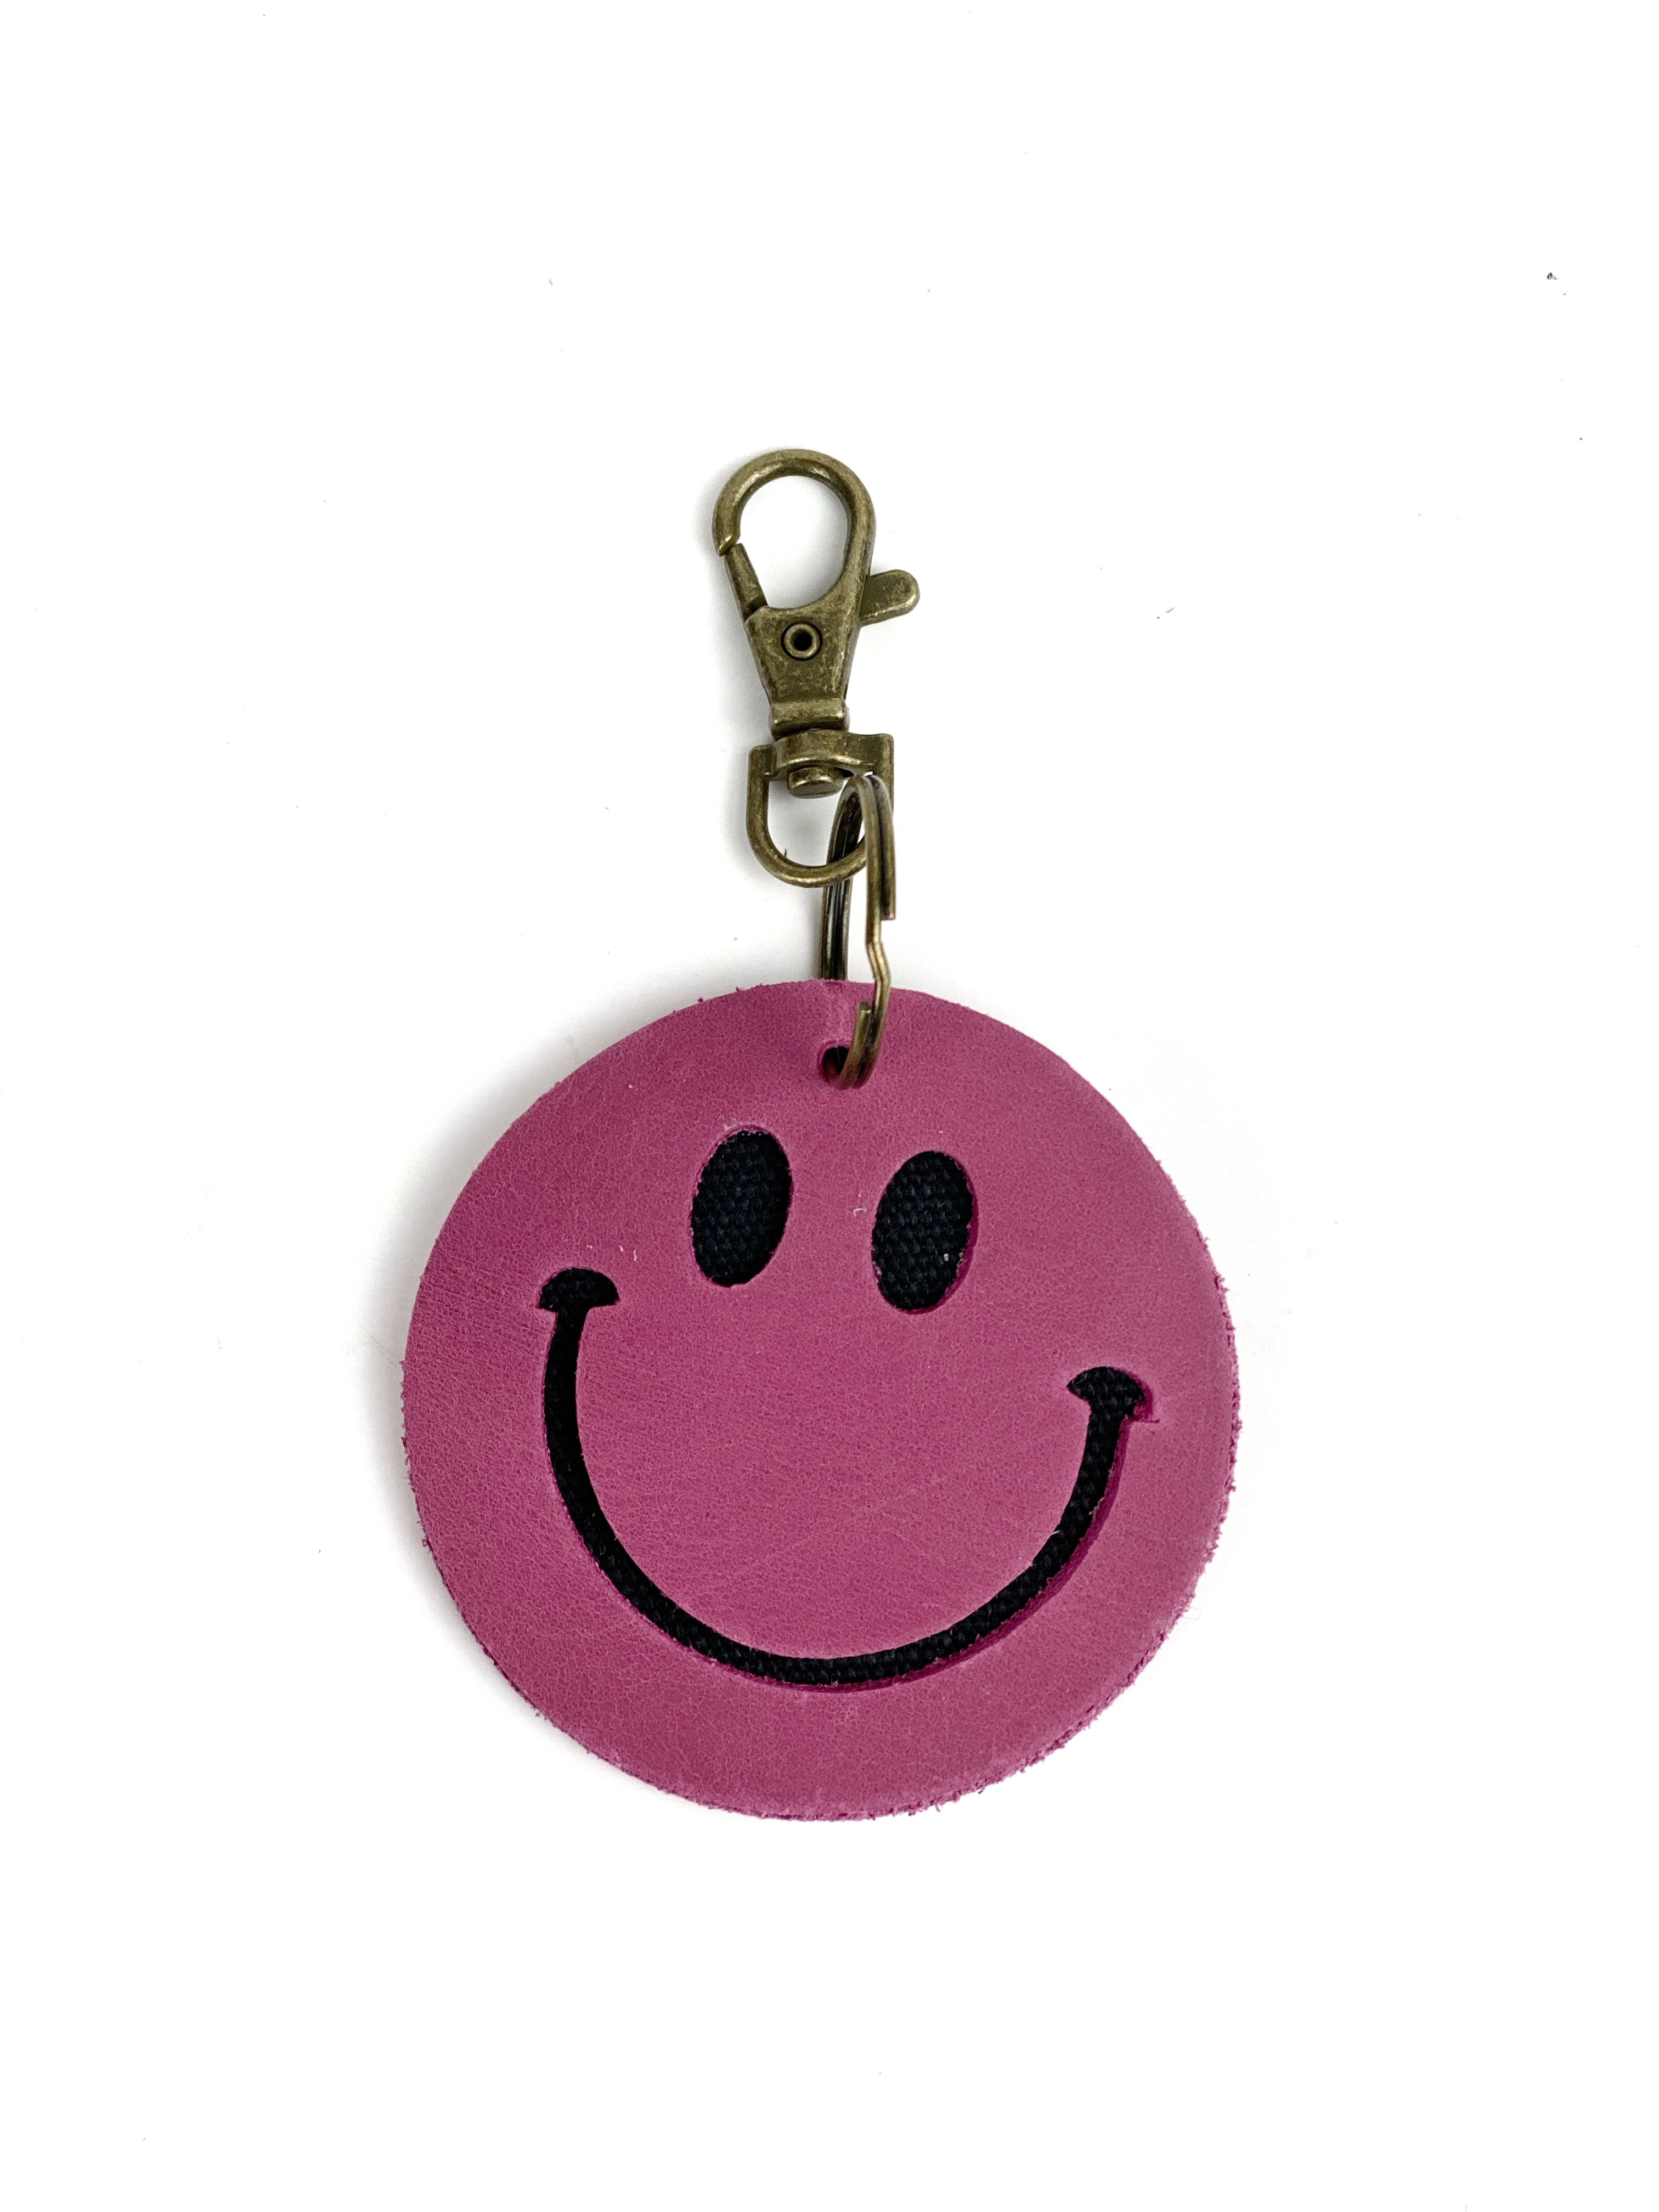 Smiley Face Key Chain for Purse Charm, Car, Truck, Motorcycle, Bicycle, ATV, Snowmobile, Camping, Hiking